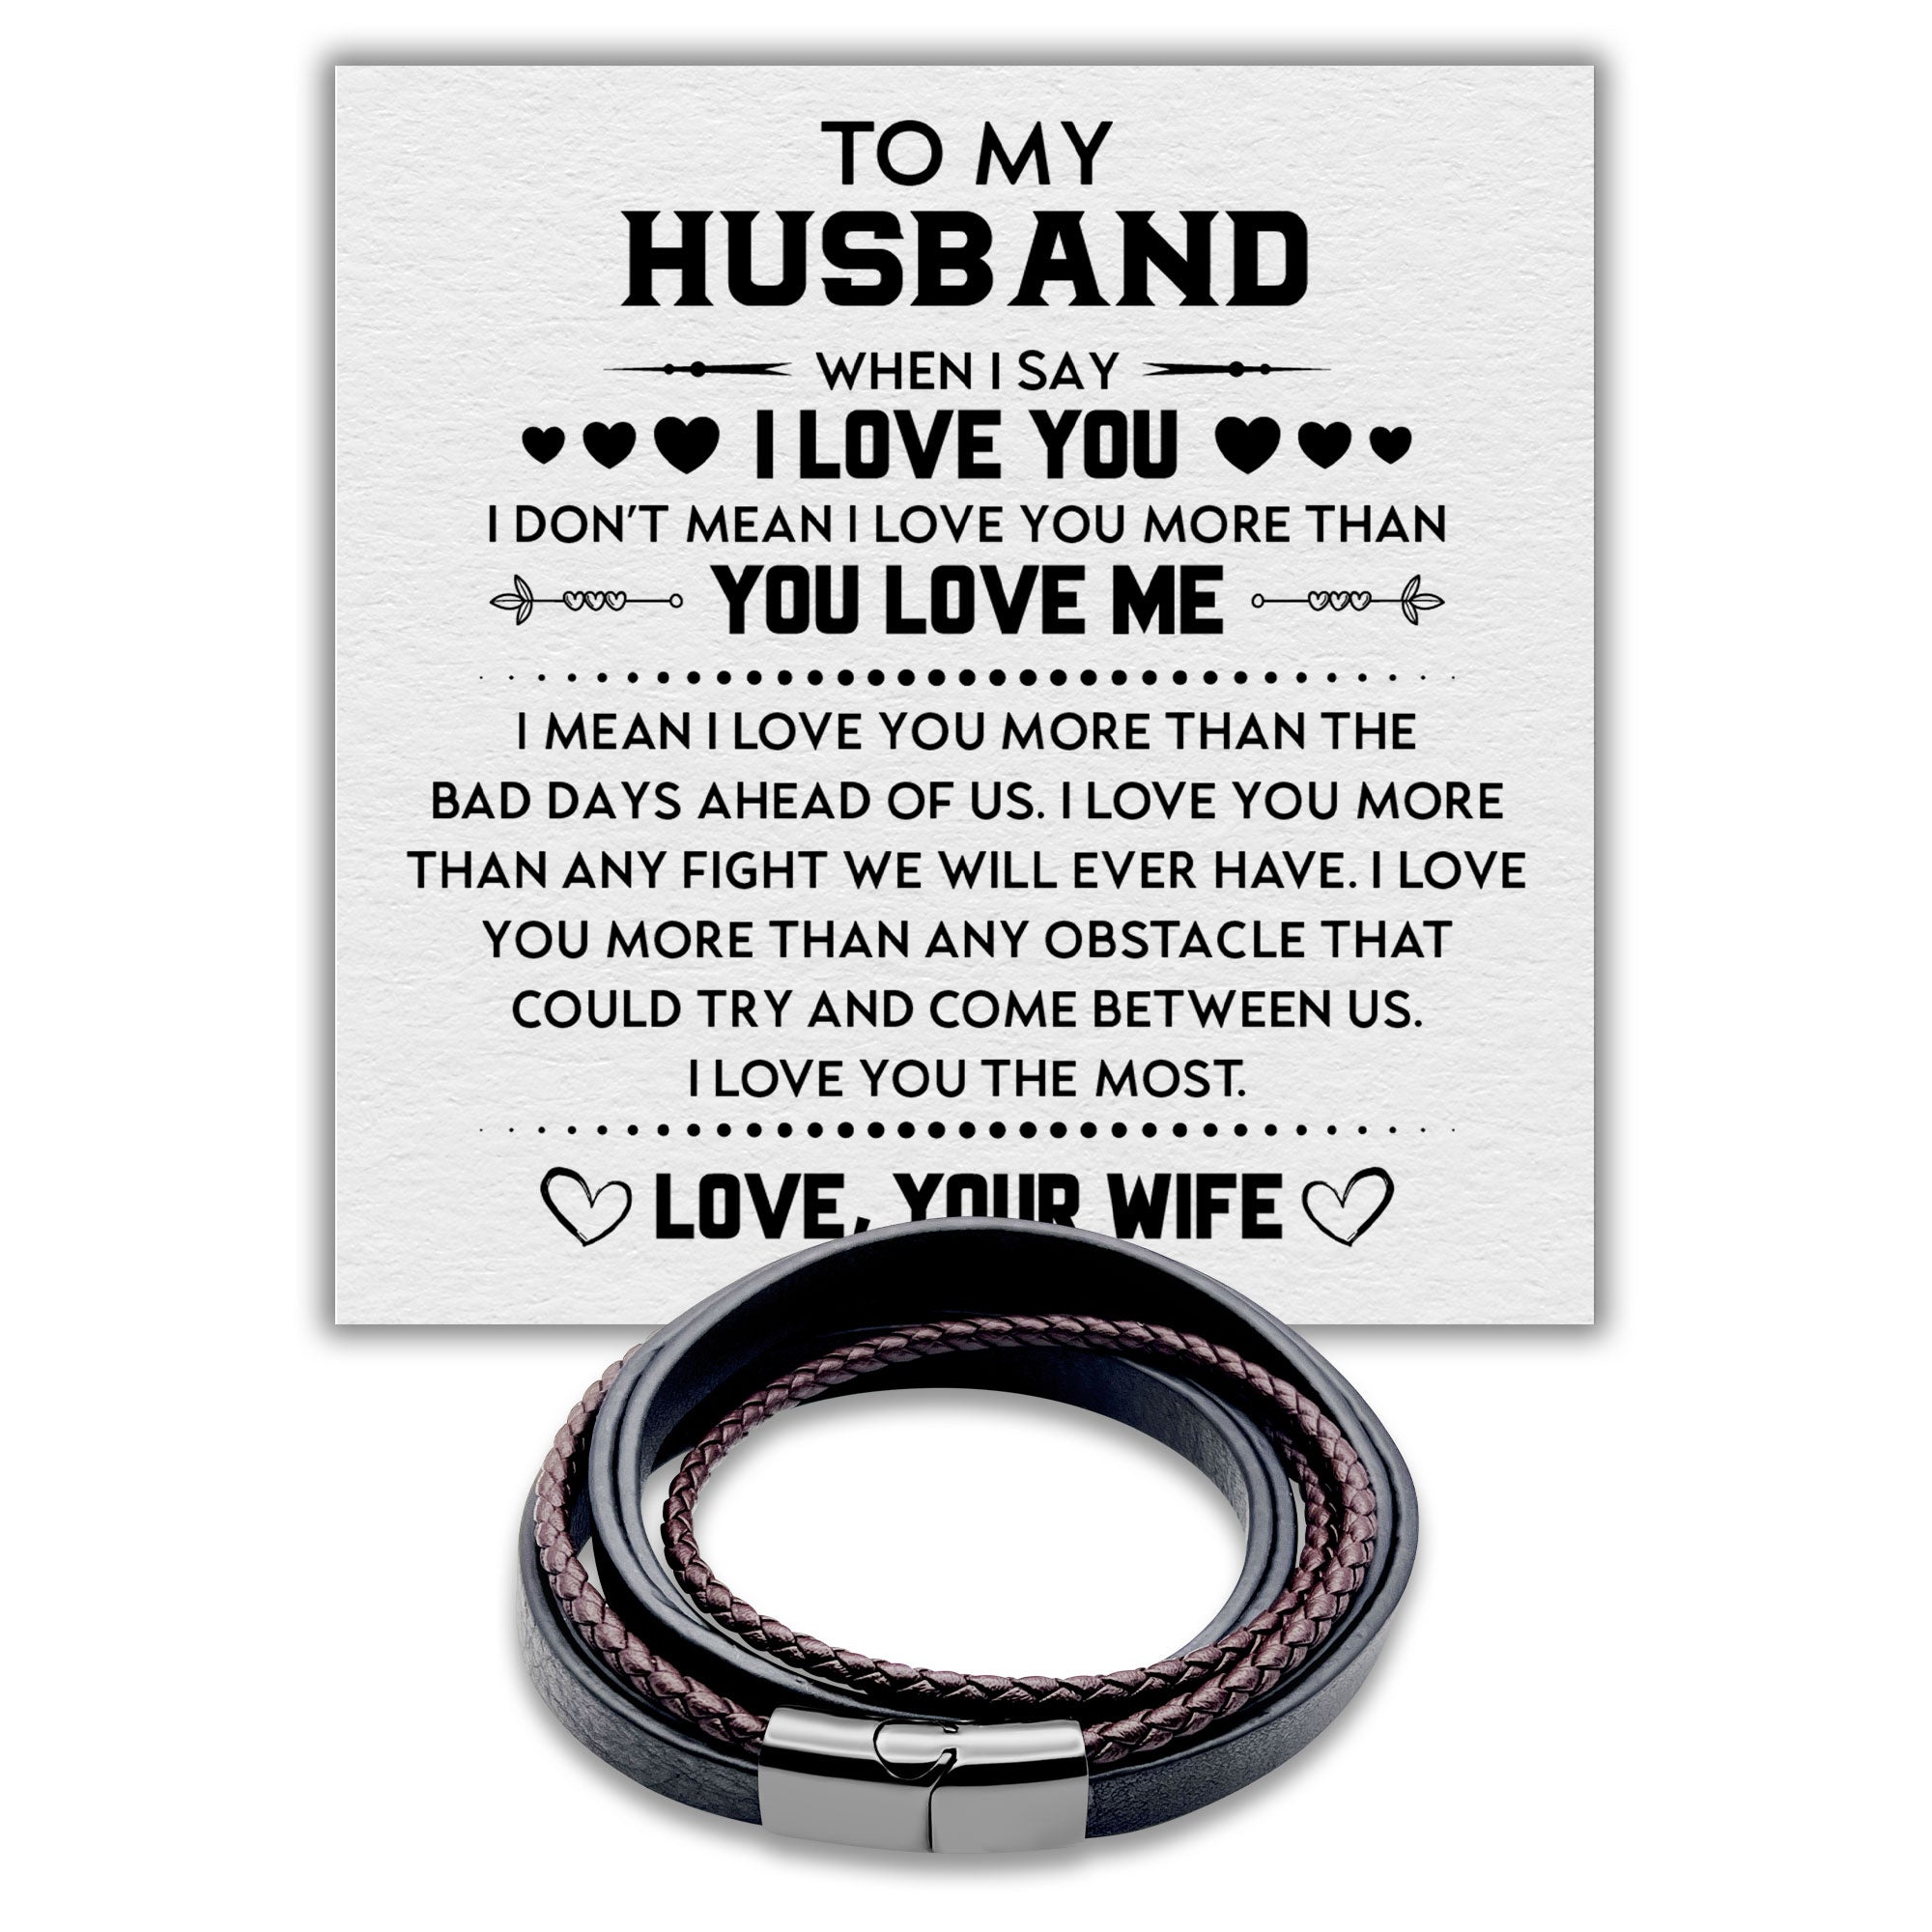 To my Husband I Love You The Most - Premium Stainless Steel Italian Leather Braided Two-Tone Layer Bracelet for Men